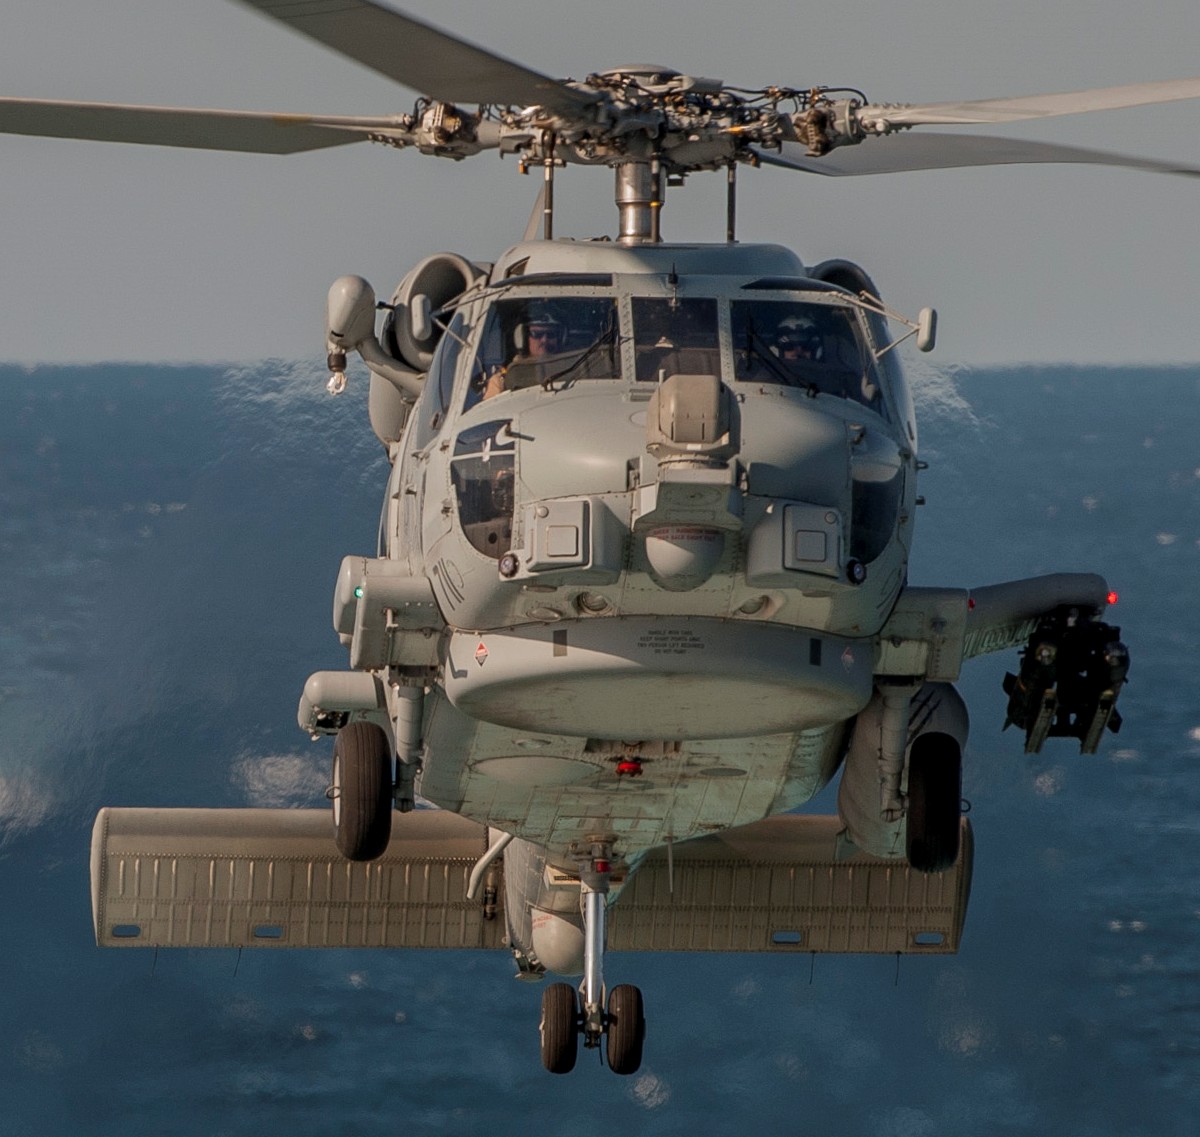 hsm-74 swamp foxes helicopter maritime strike squadron us navy mh-60r seahawk 2014 23